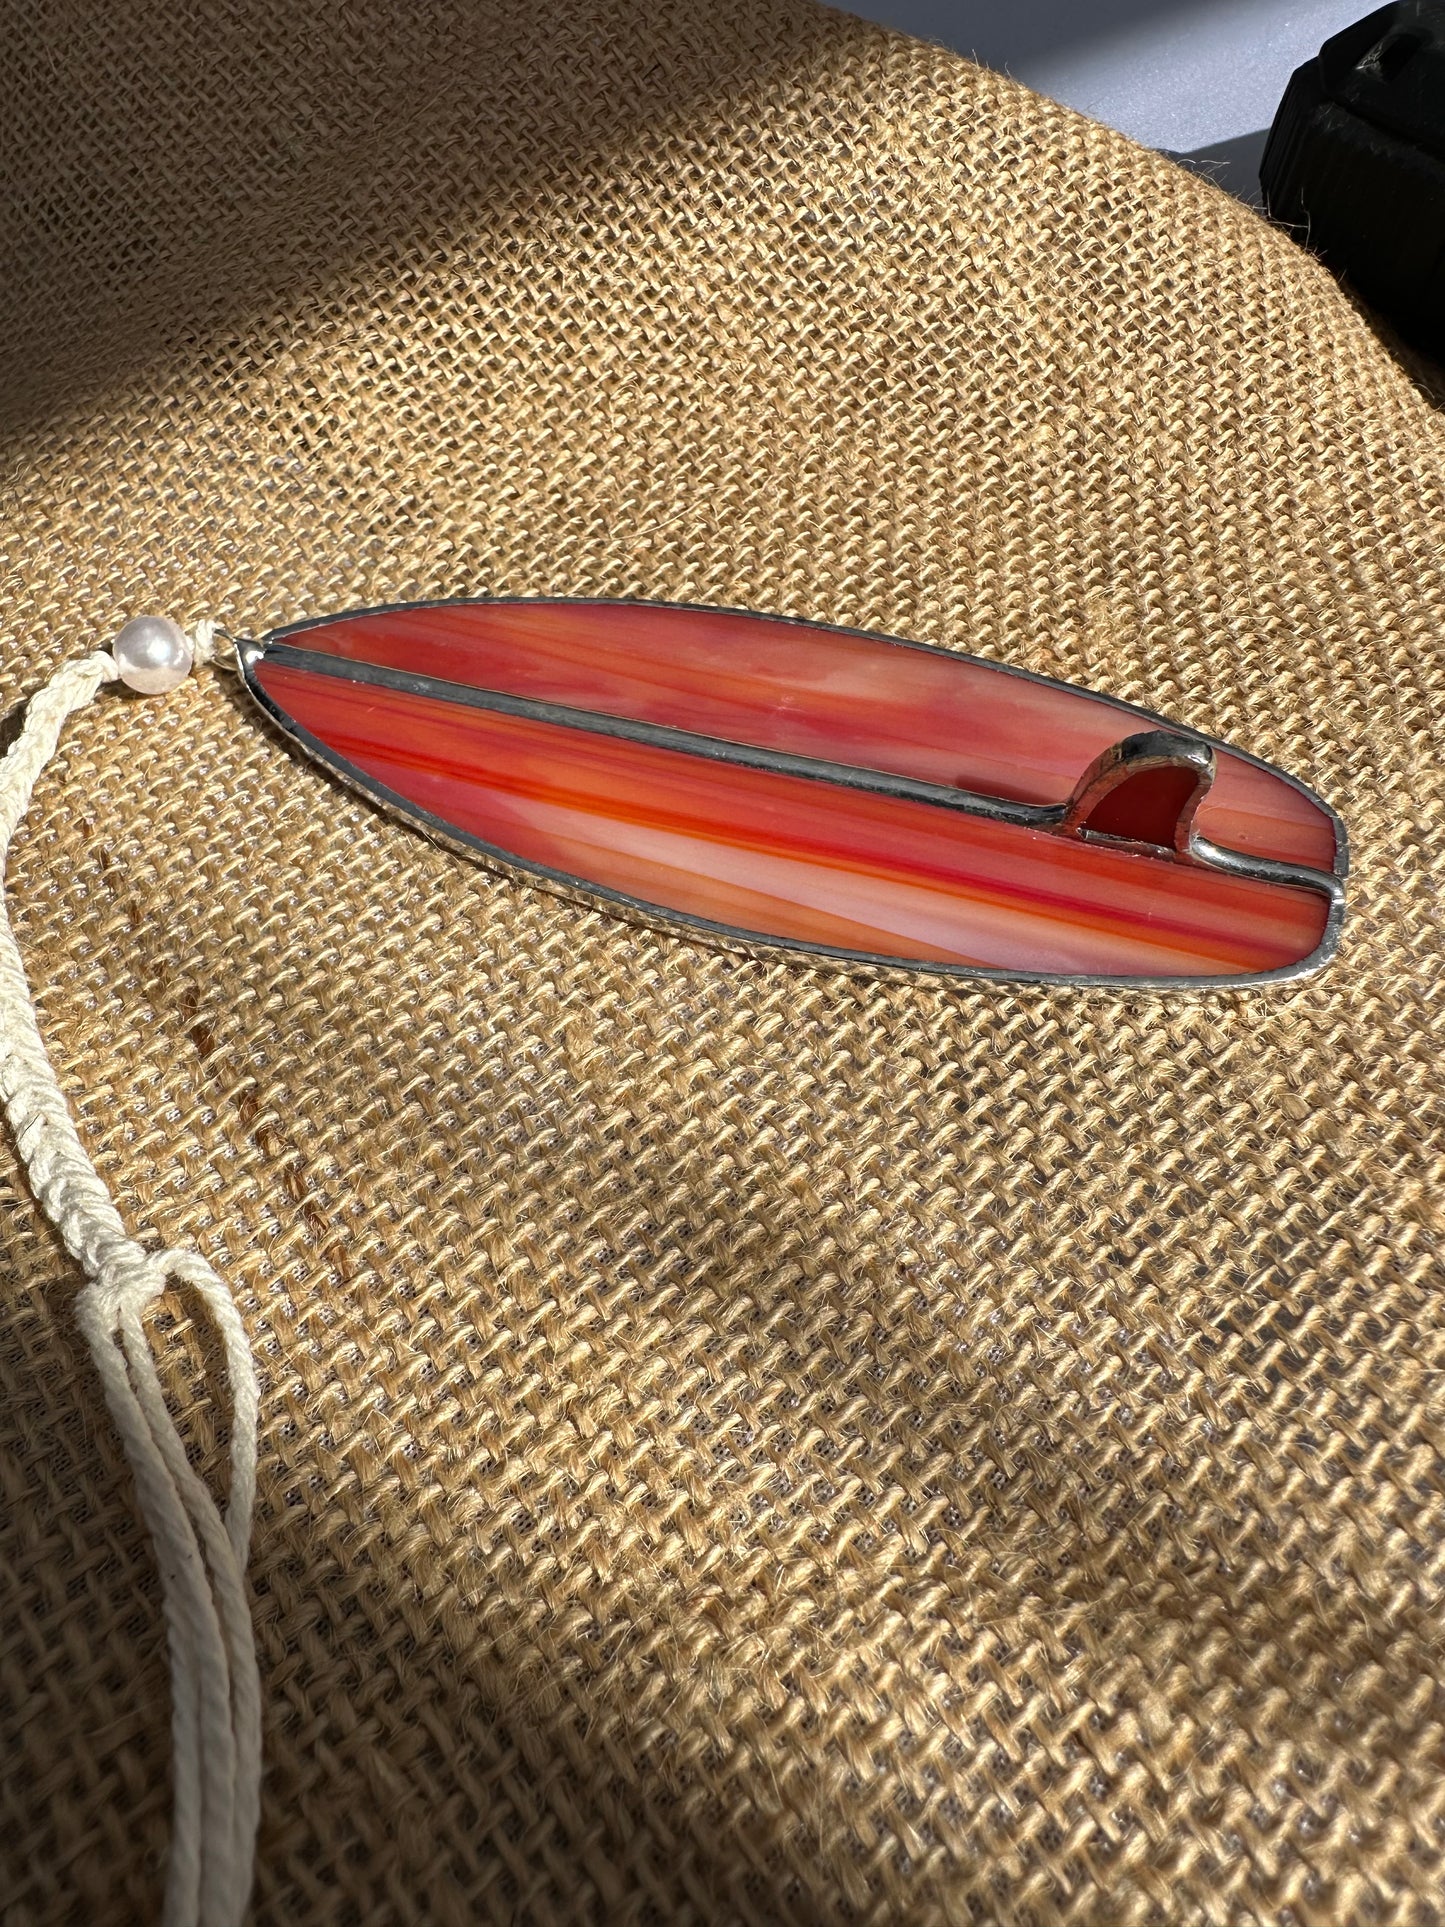 Sunset Red Stained Glass Surfboard